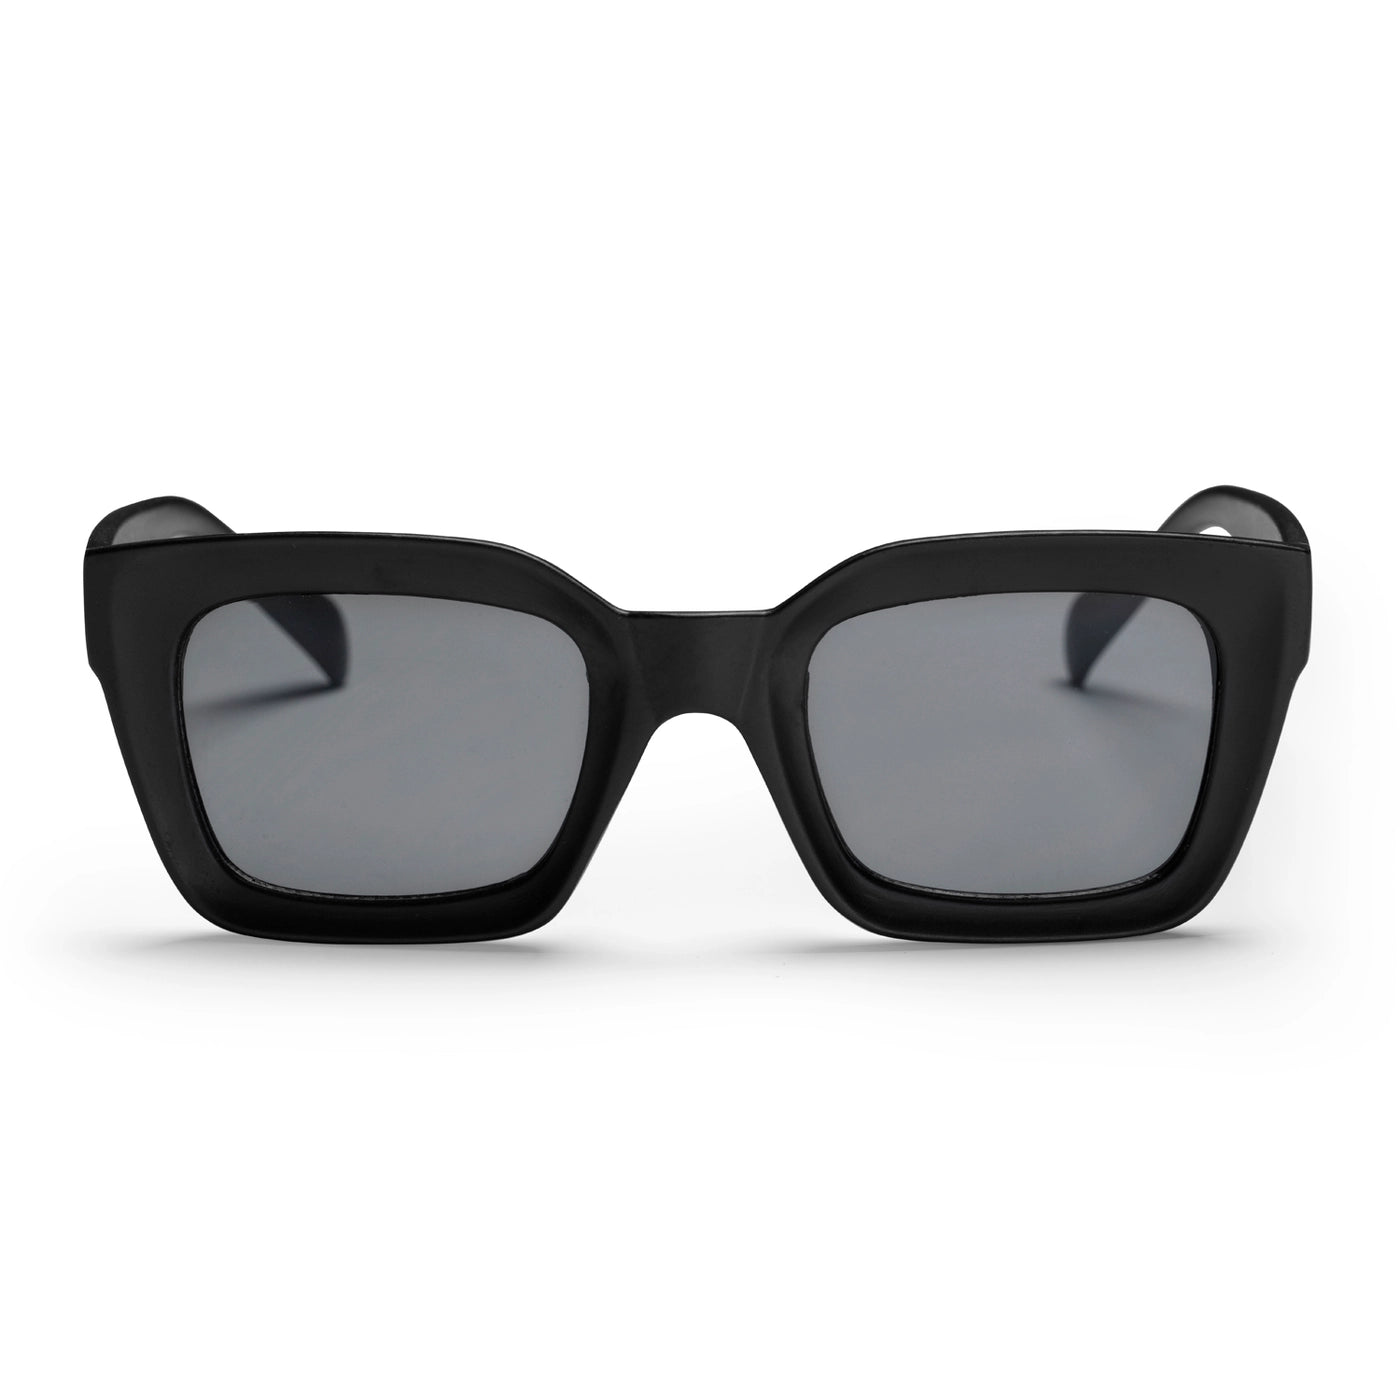 ANNA RECYCLED SUNGLASSES: BLACK